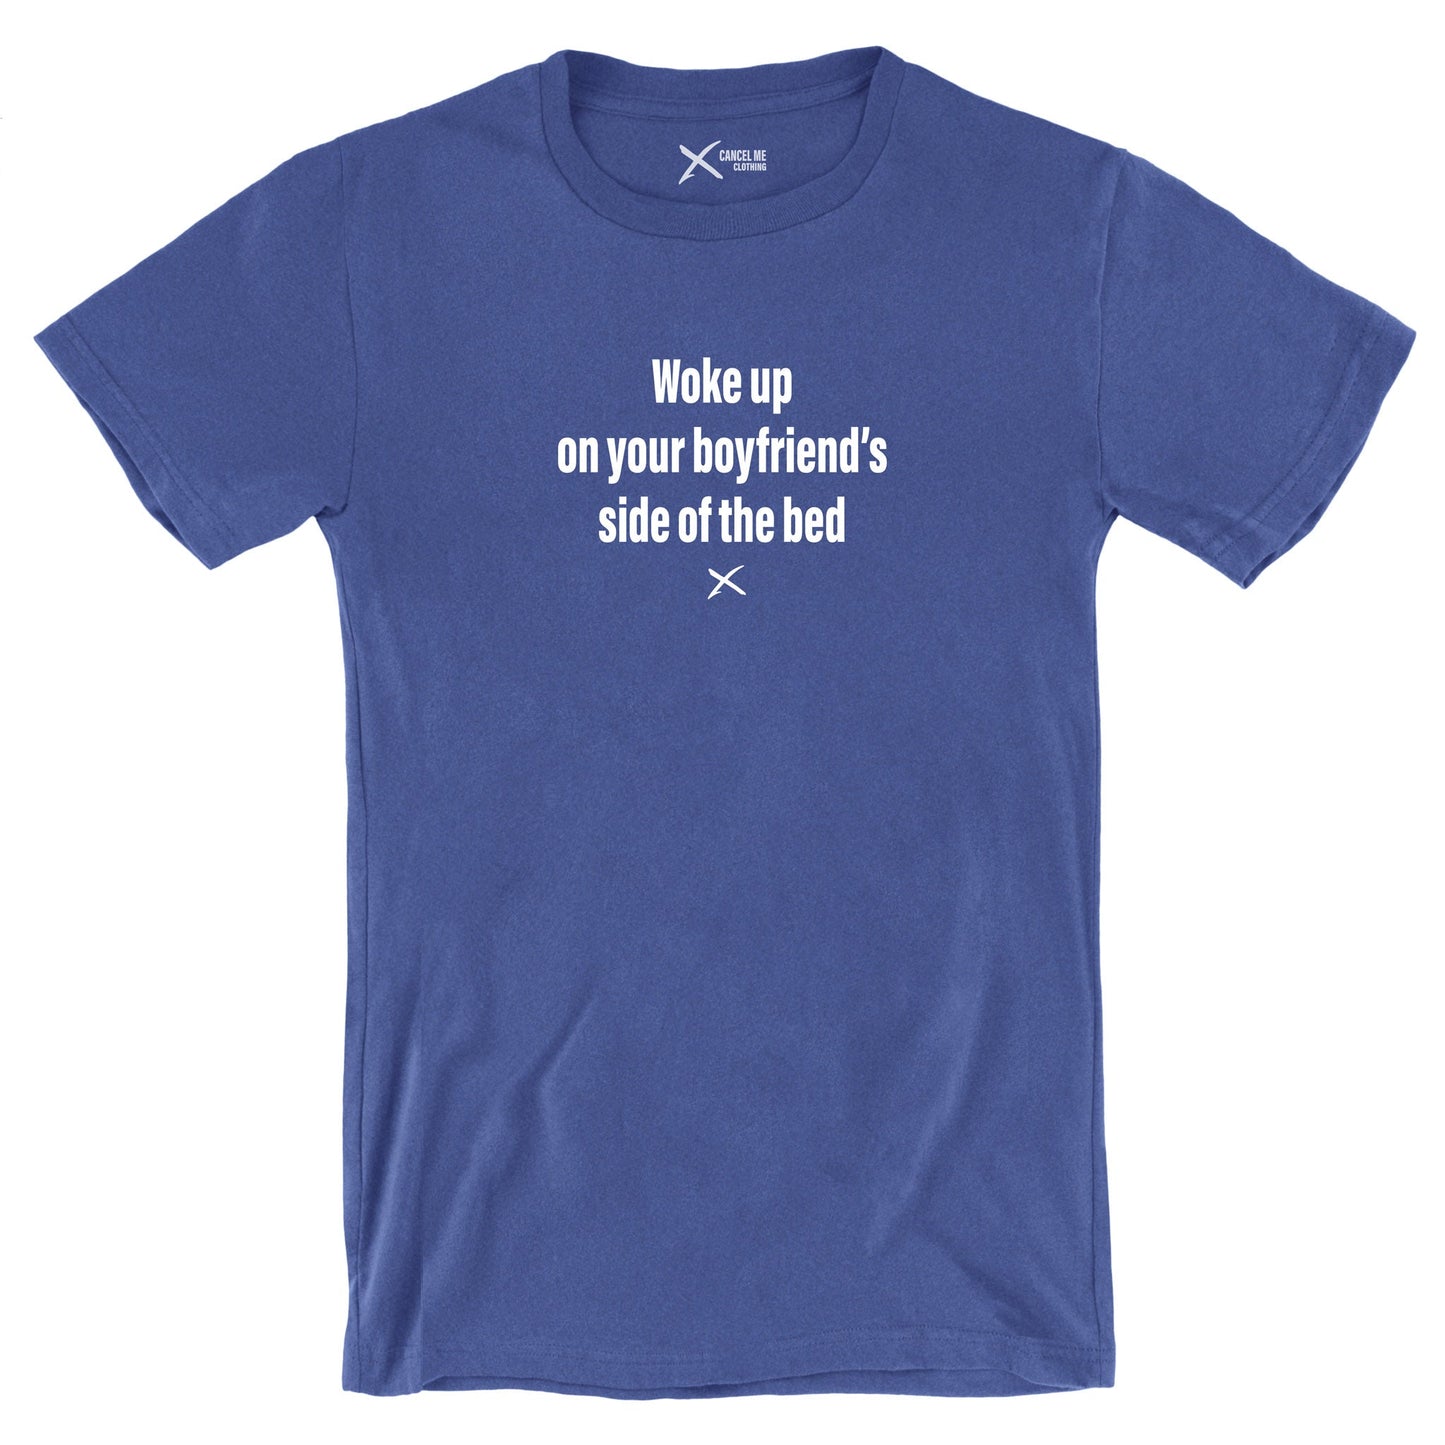 Woke up on your boyfriend's side of the bed - Shirt